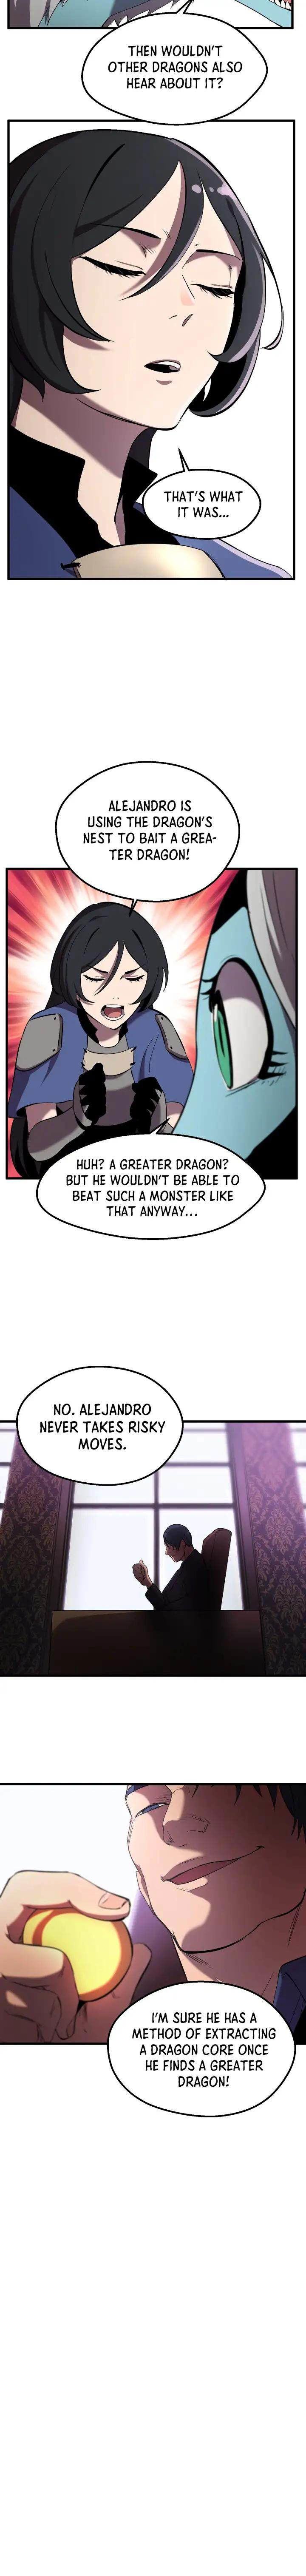 survival-story-of-a-sword-king-in-a-fantasy-world-chap-31-12